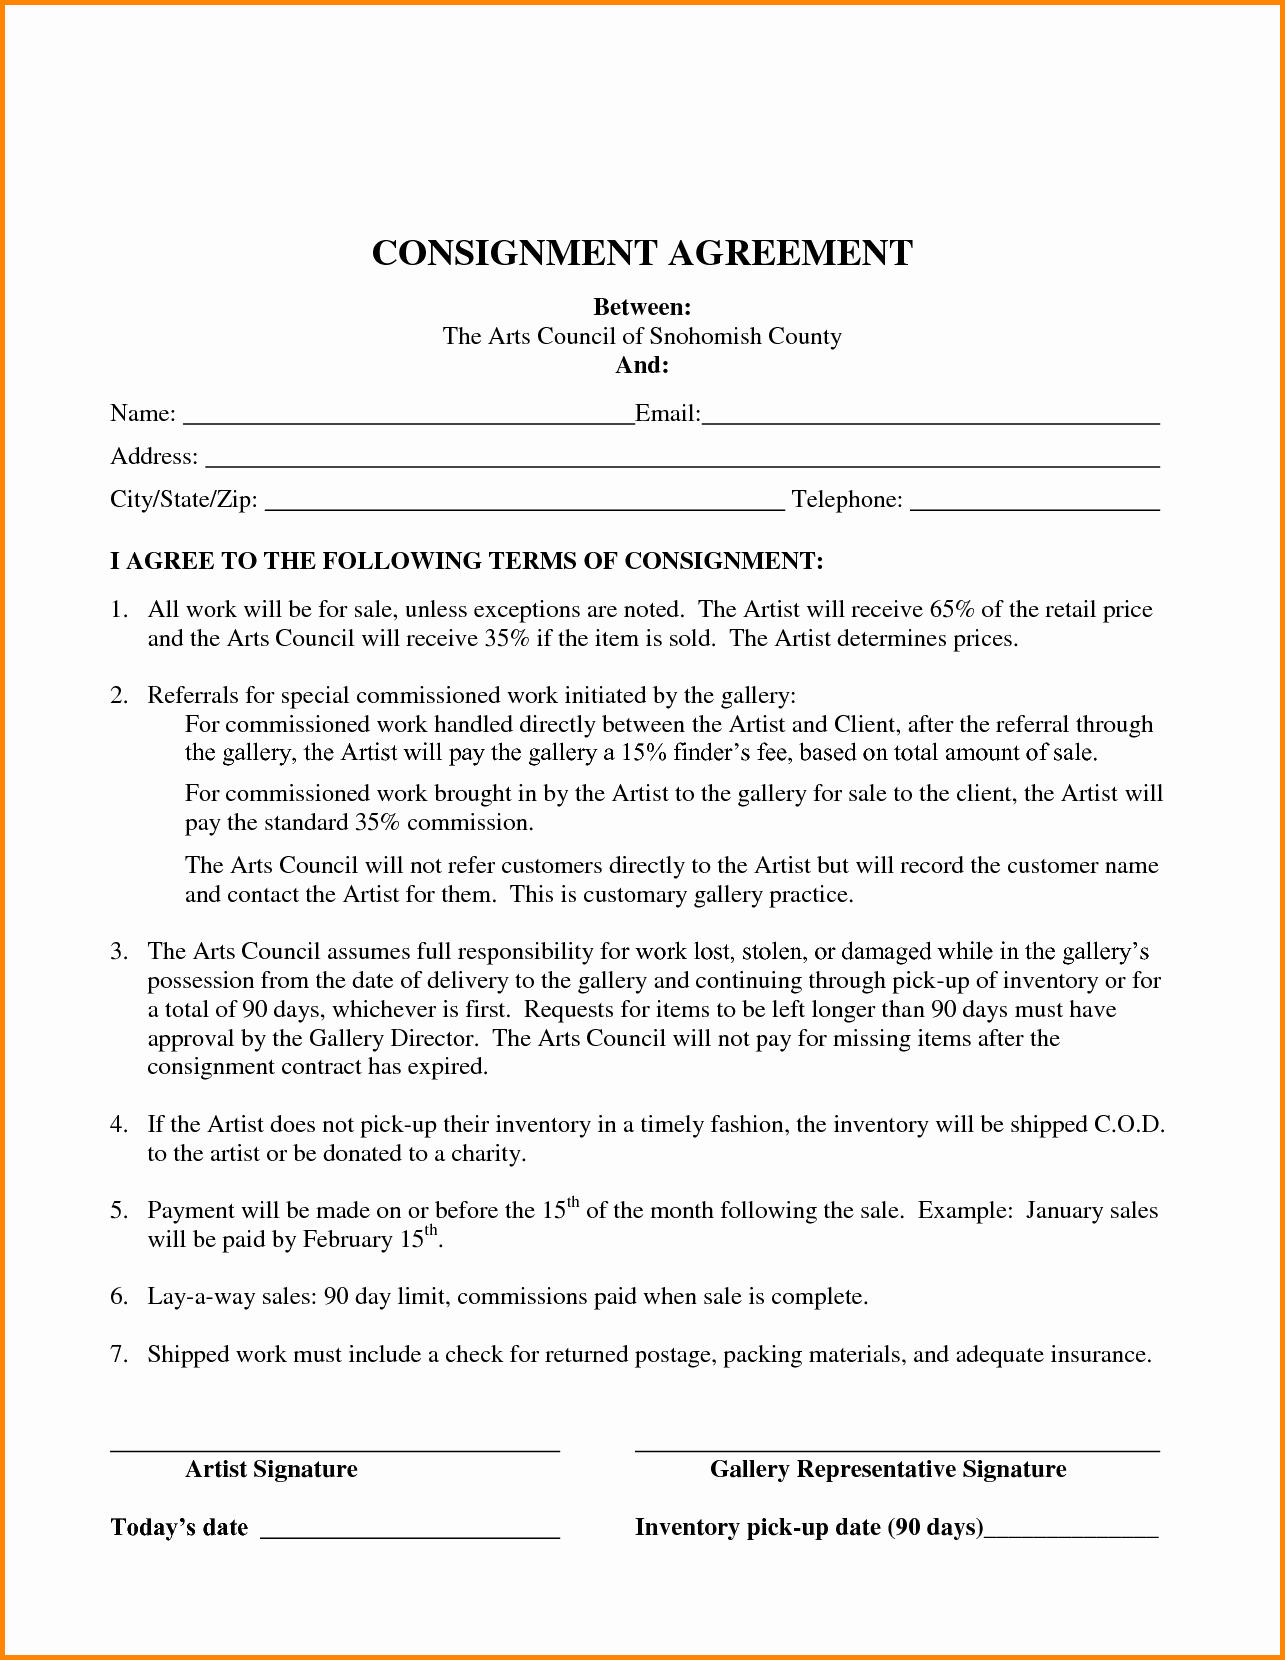 Consignment Agreement Template Free Fresh Consignment Inventory Agreement Template